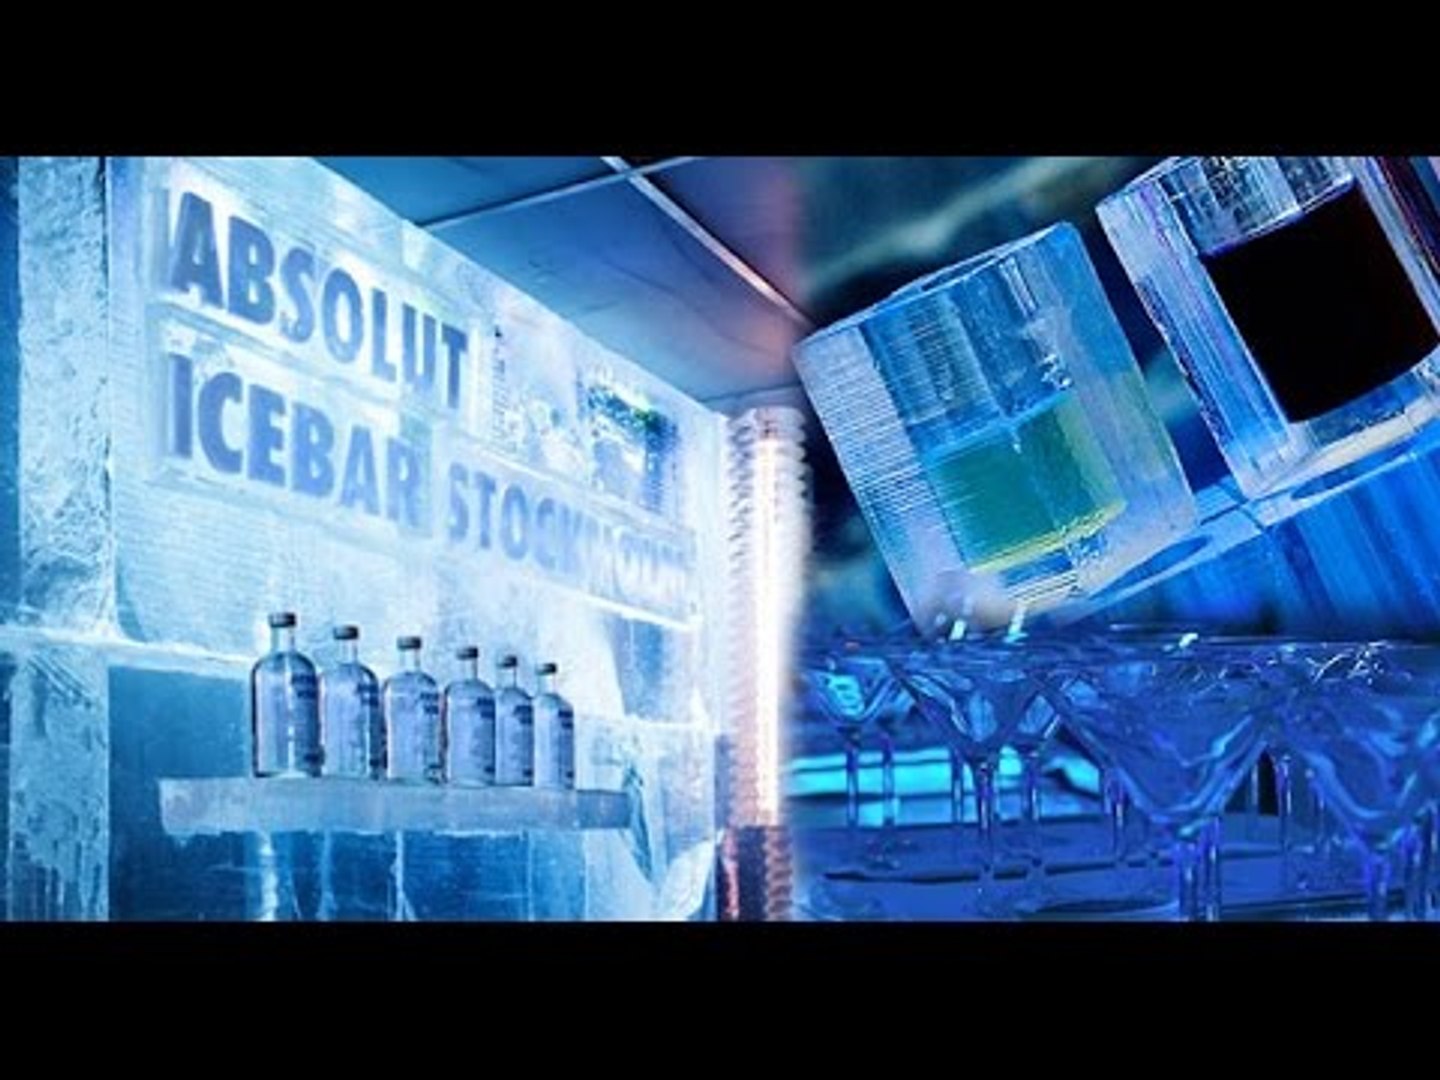 Absolut Ice Bar Stockholm at Sweden - video Dailymotion